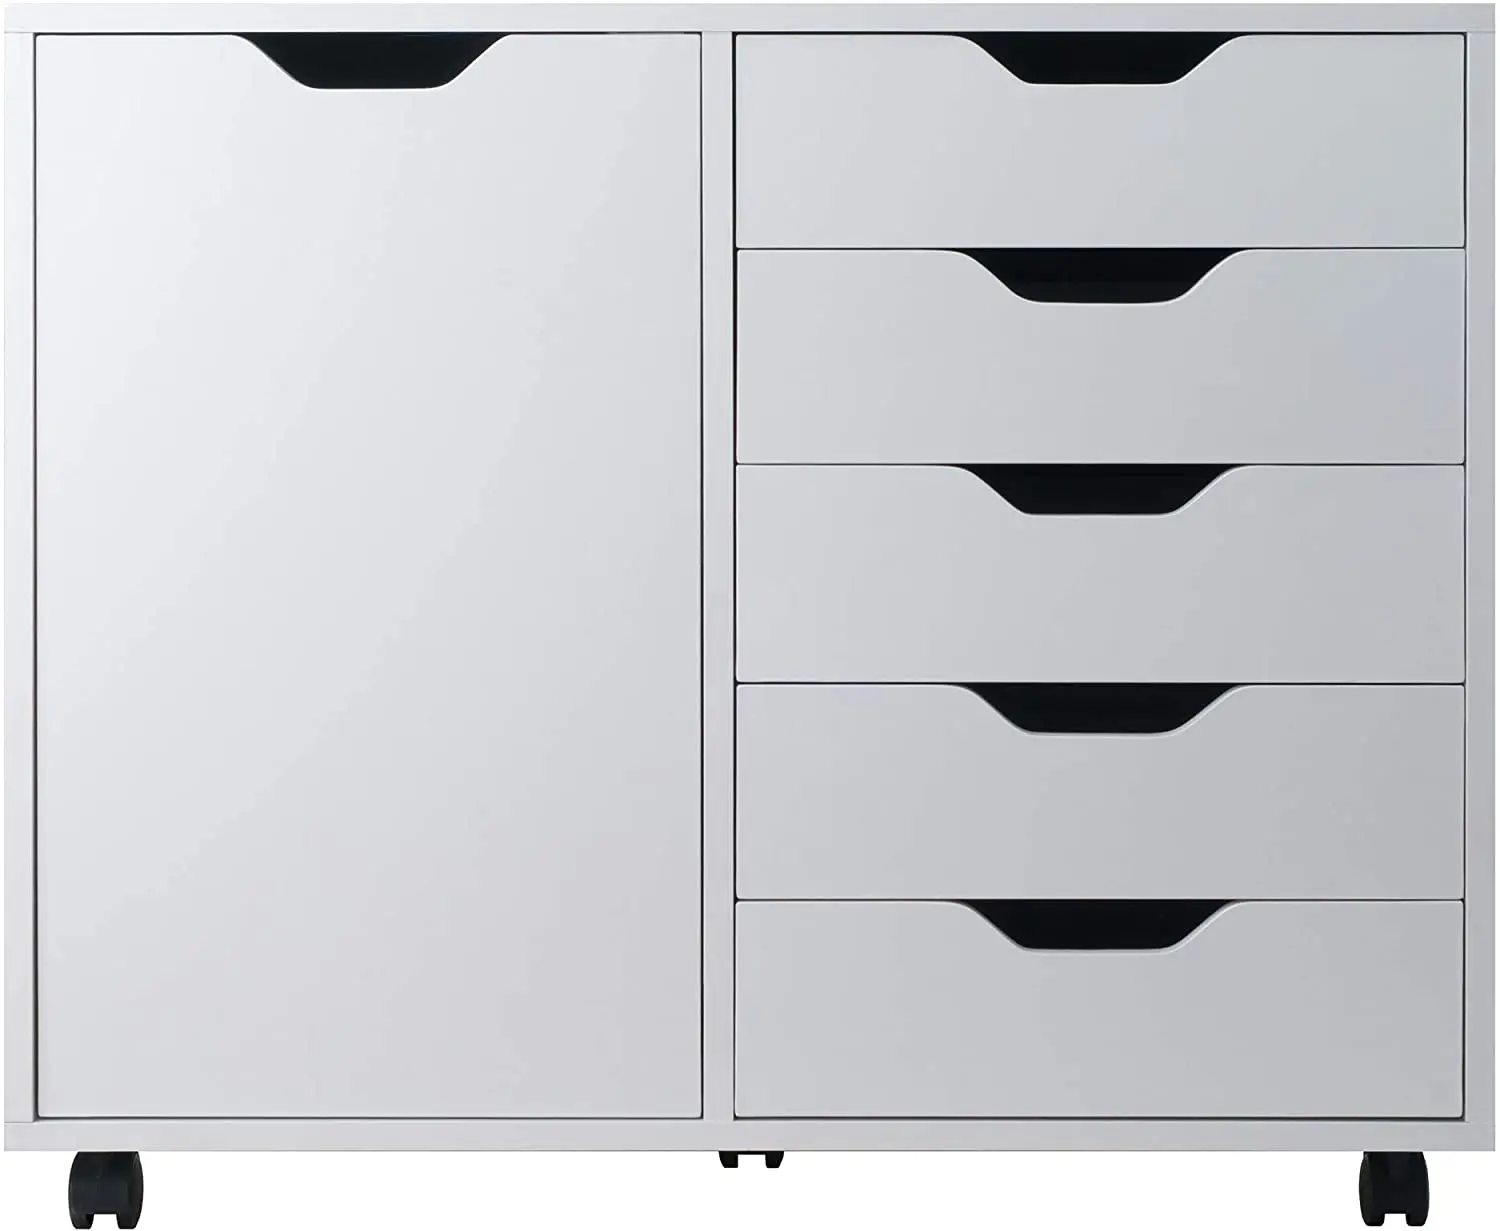 
Winsome Wood Halifax 5-Drawer Mobile Side Cabinet, Multiple Finishes 